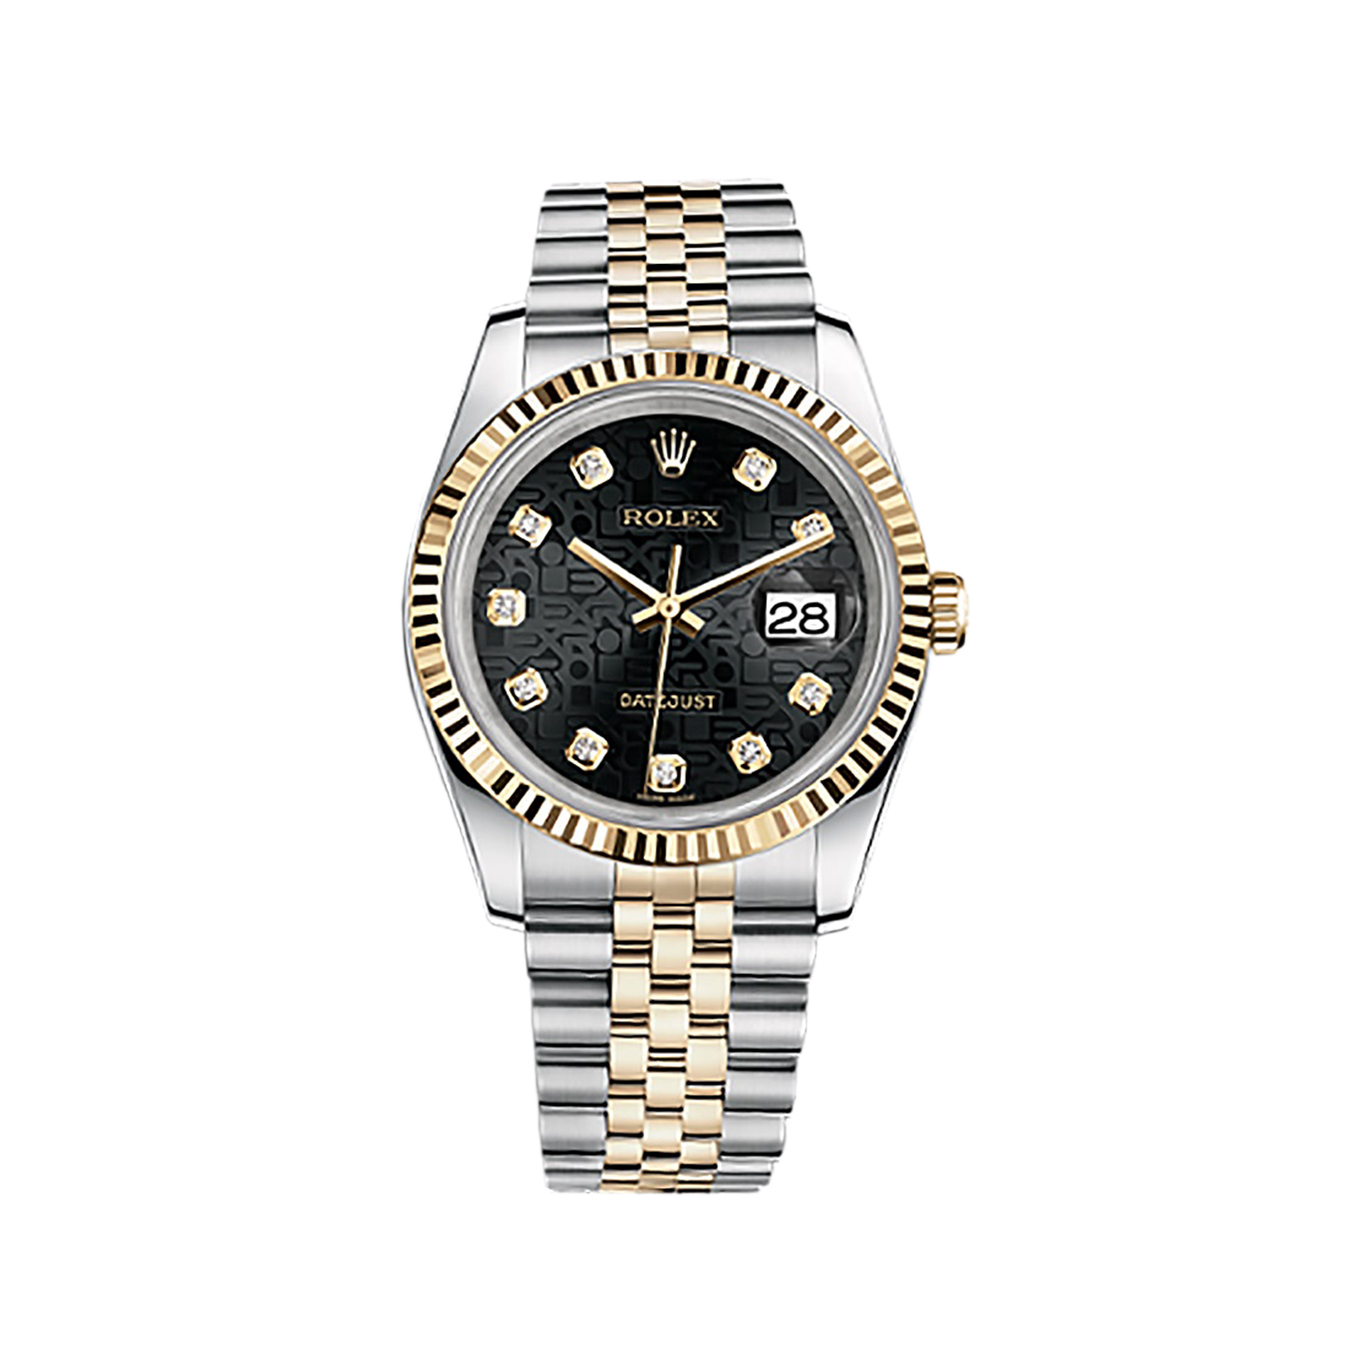 Datejust 36 116233 Gold & Stainless Steel Watch (Black Jubilee Design Set with Diamonds) - Click Image to Close